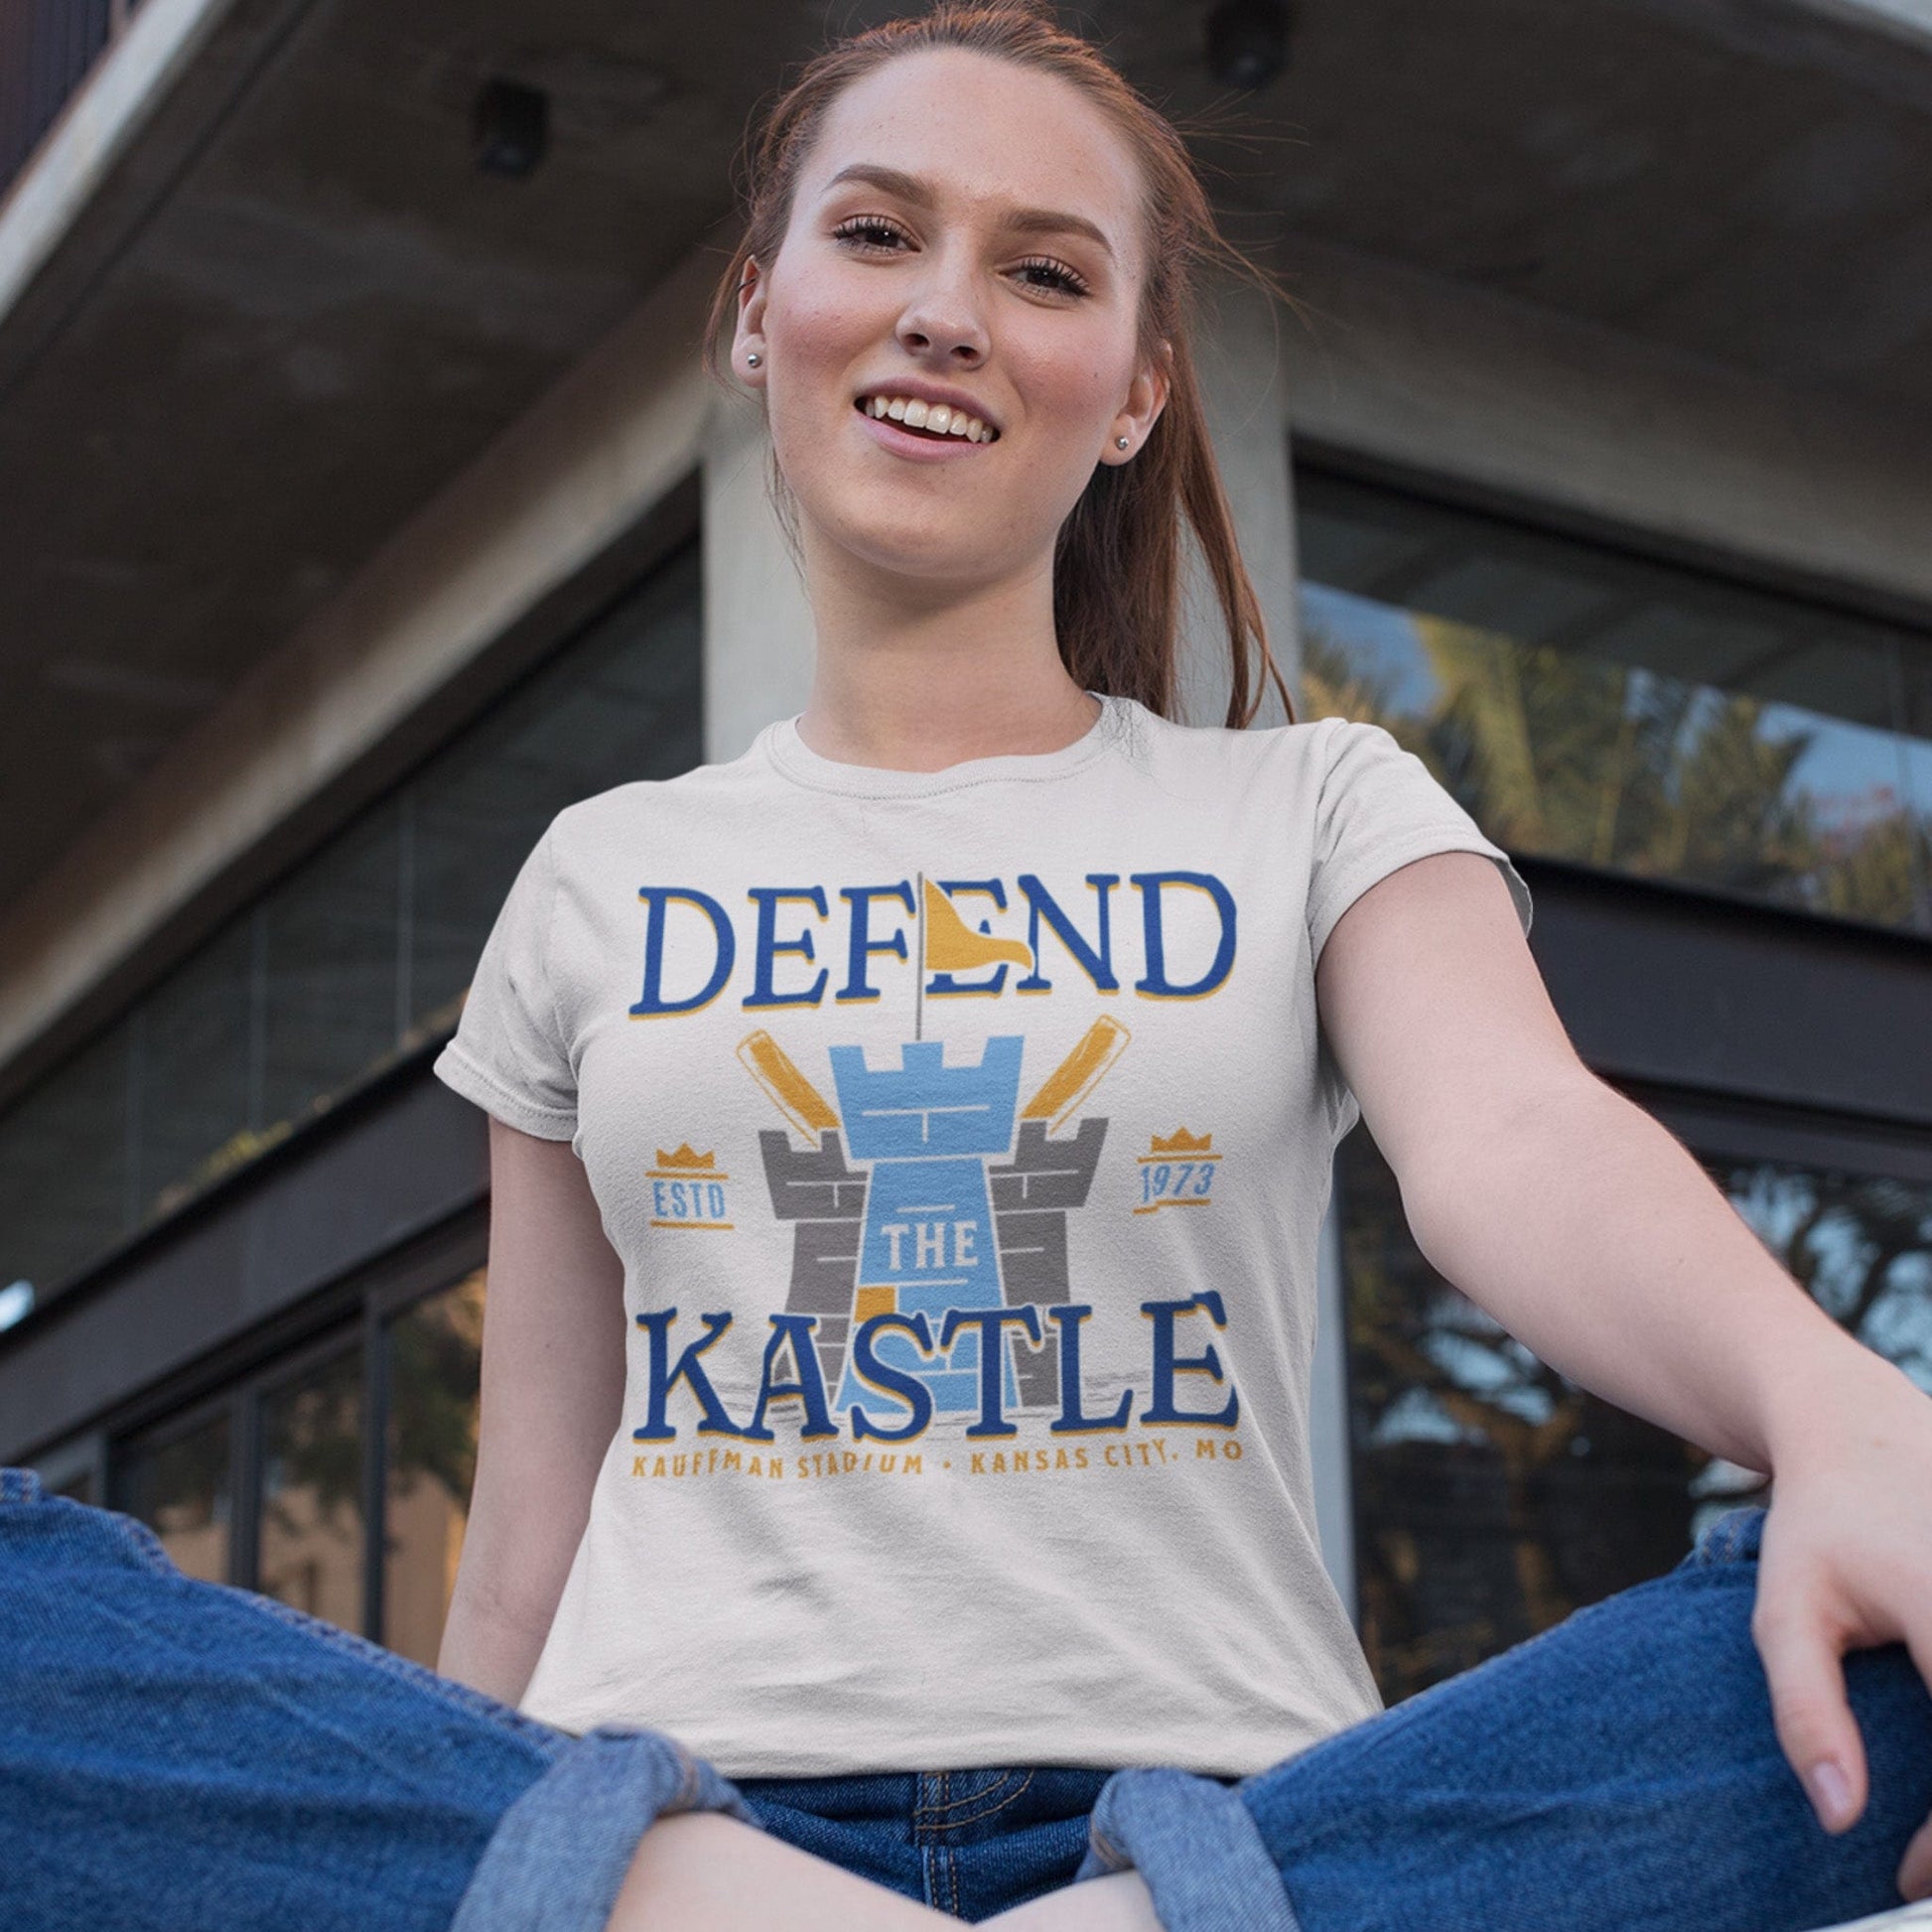 KC Swag Kansas City Royals powder, blue, gold DEFEND THE KASTLE on natural cream unisex t-shirt worn by female model sitting in front of building